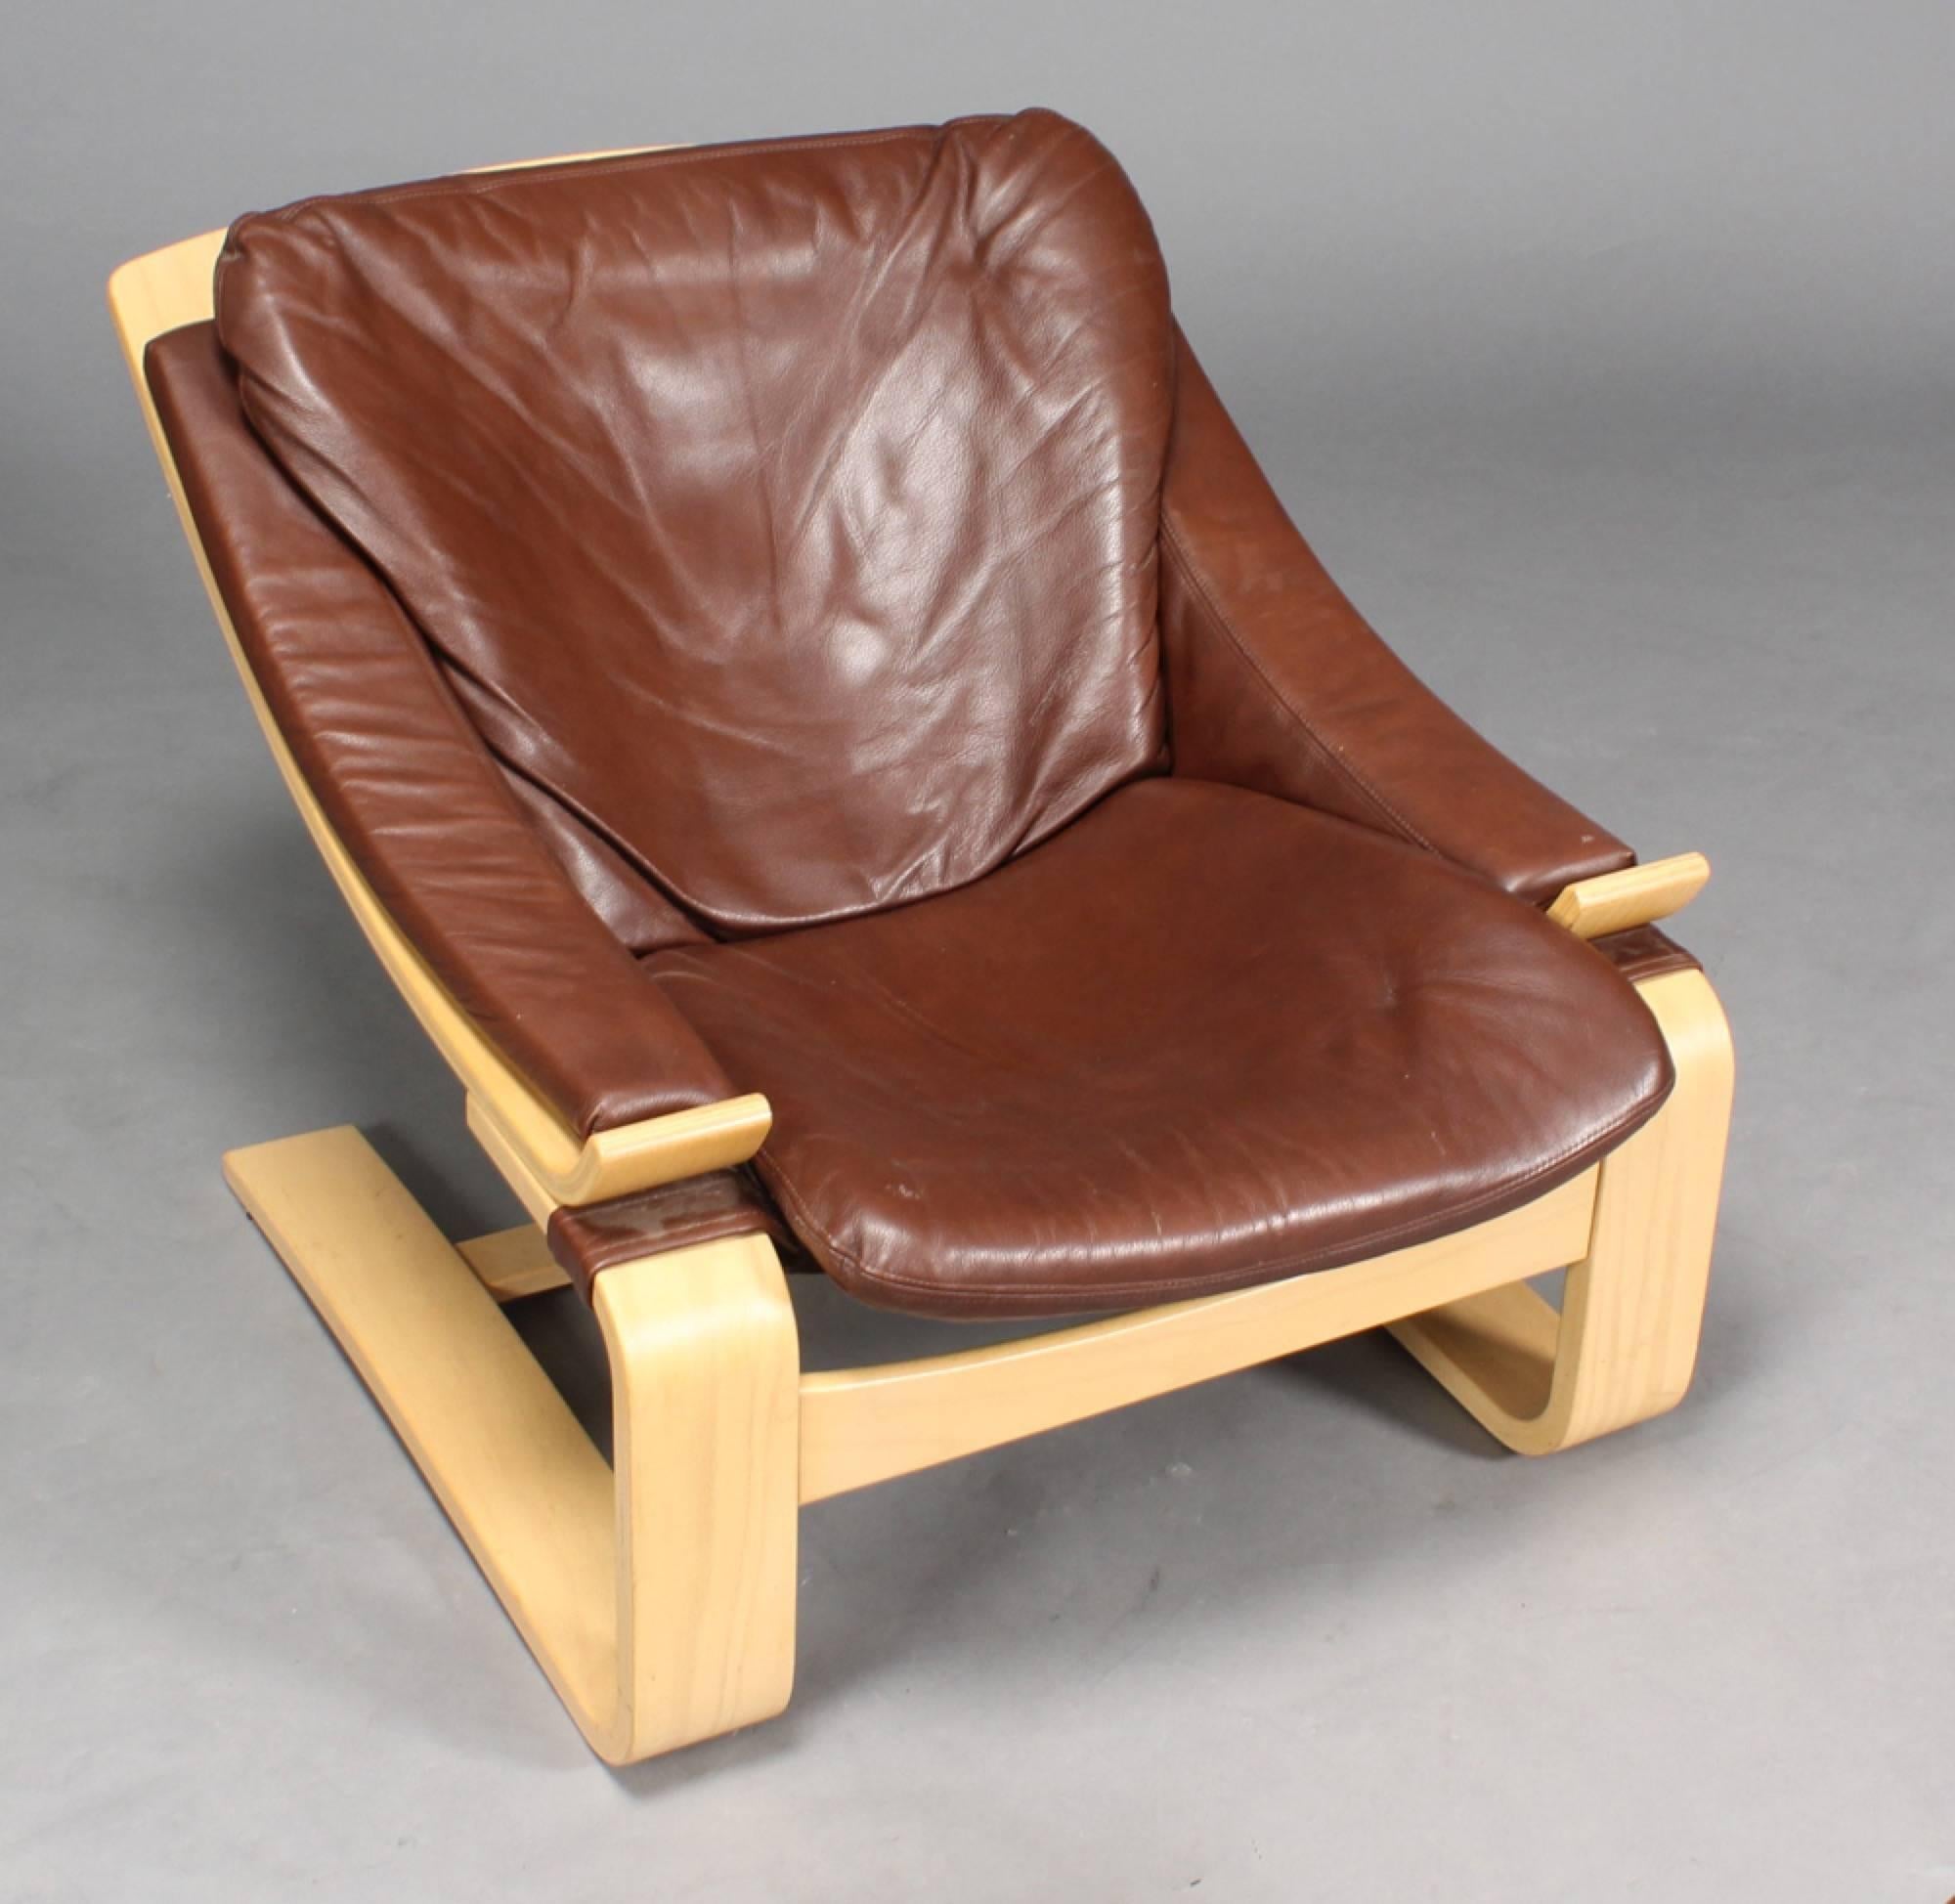 Åke Fribytter, 'Kroken' armchair and a stool with a frame of shaped beech wood upholstered with brown leather. Designed in 1974. Produced by Nelo, Sweden, with the 25th anniversary plaque, the number limited edition No. 257/1000.